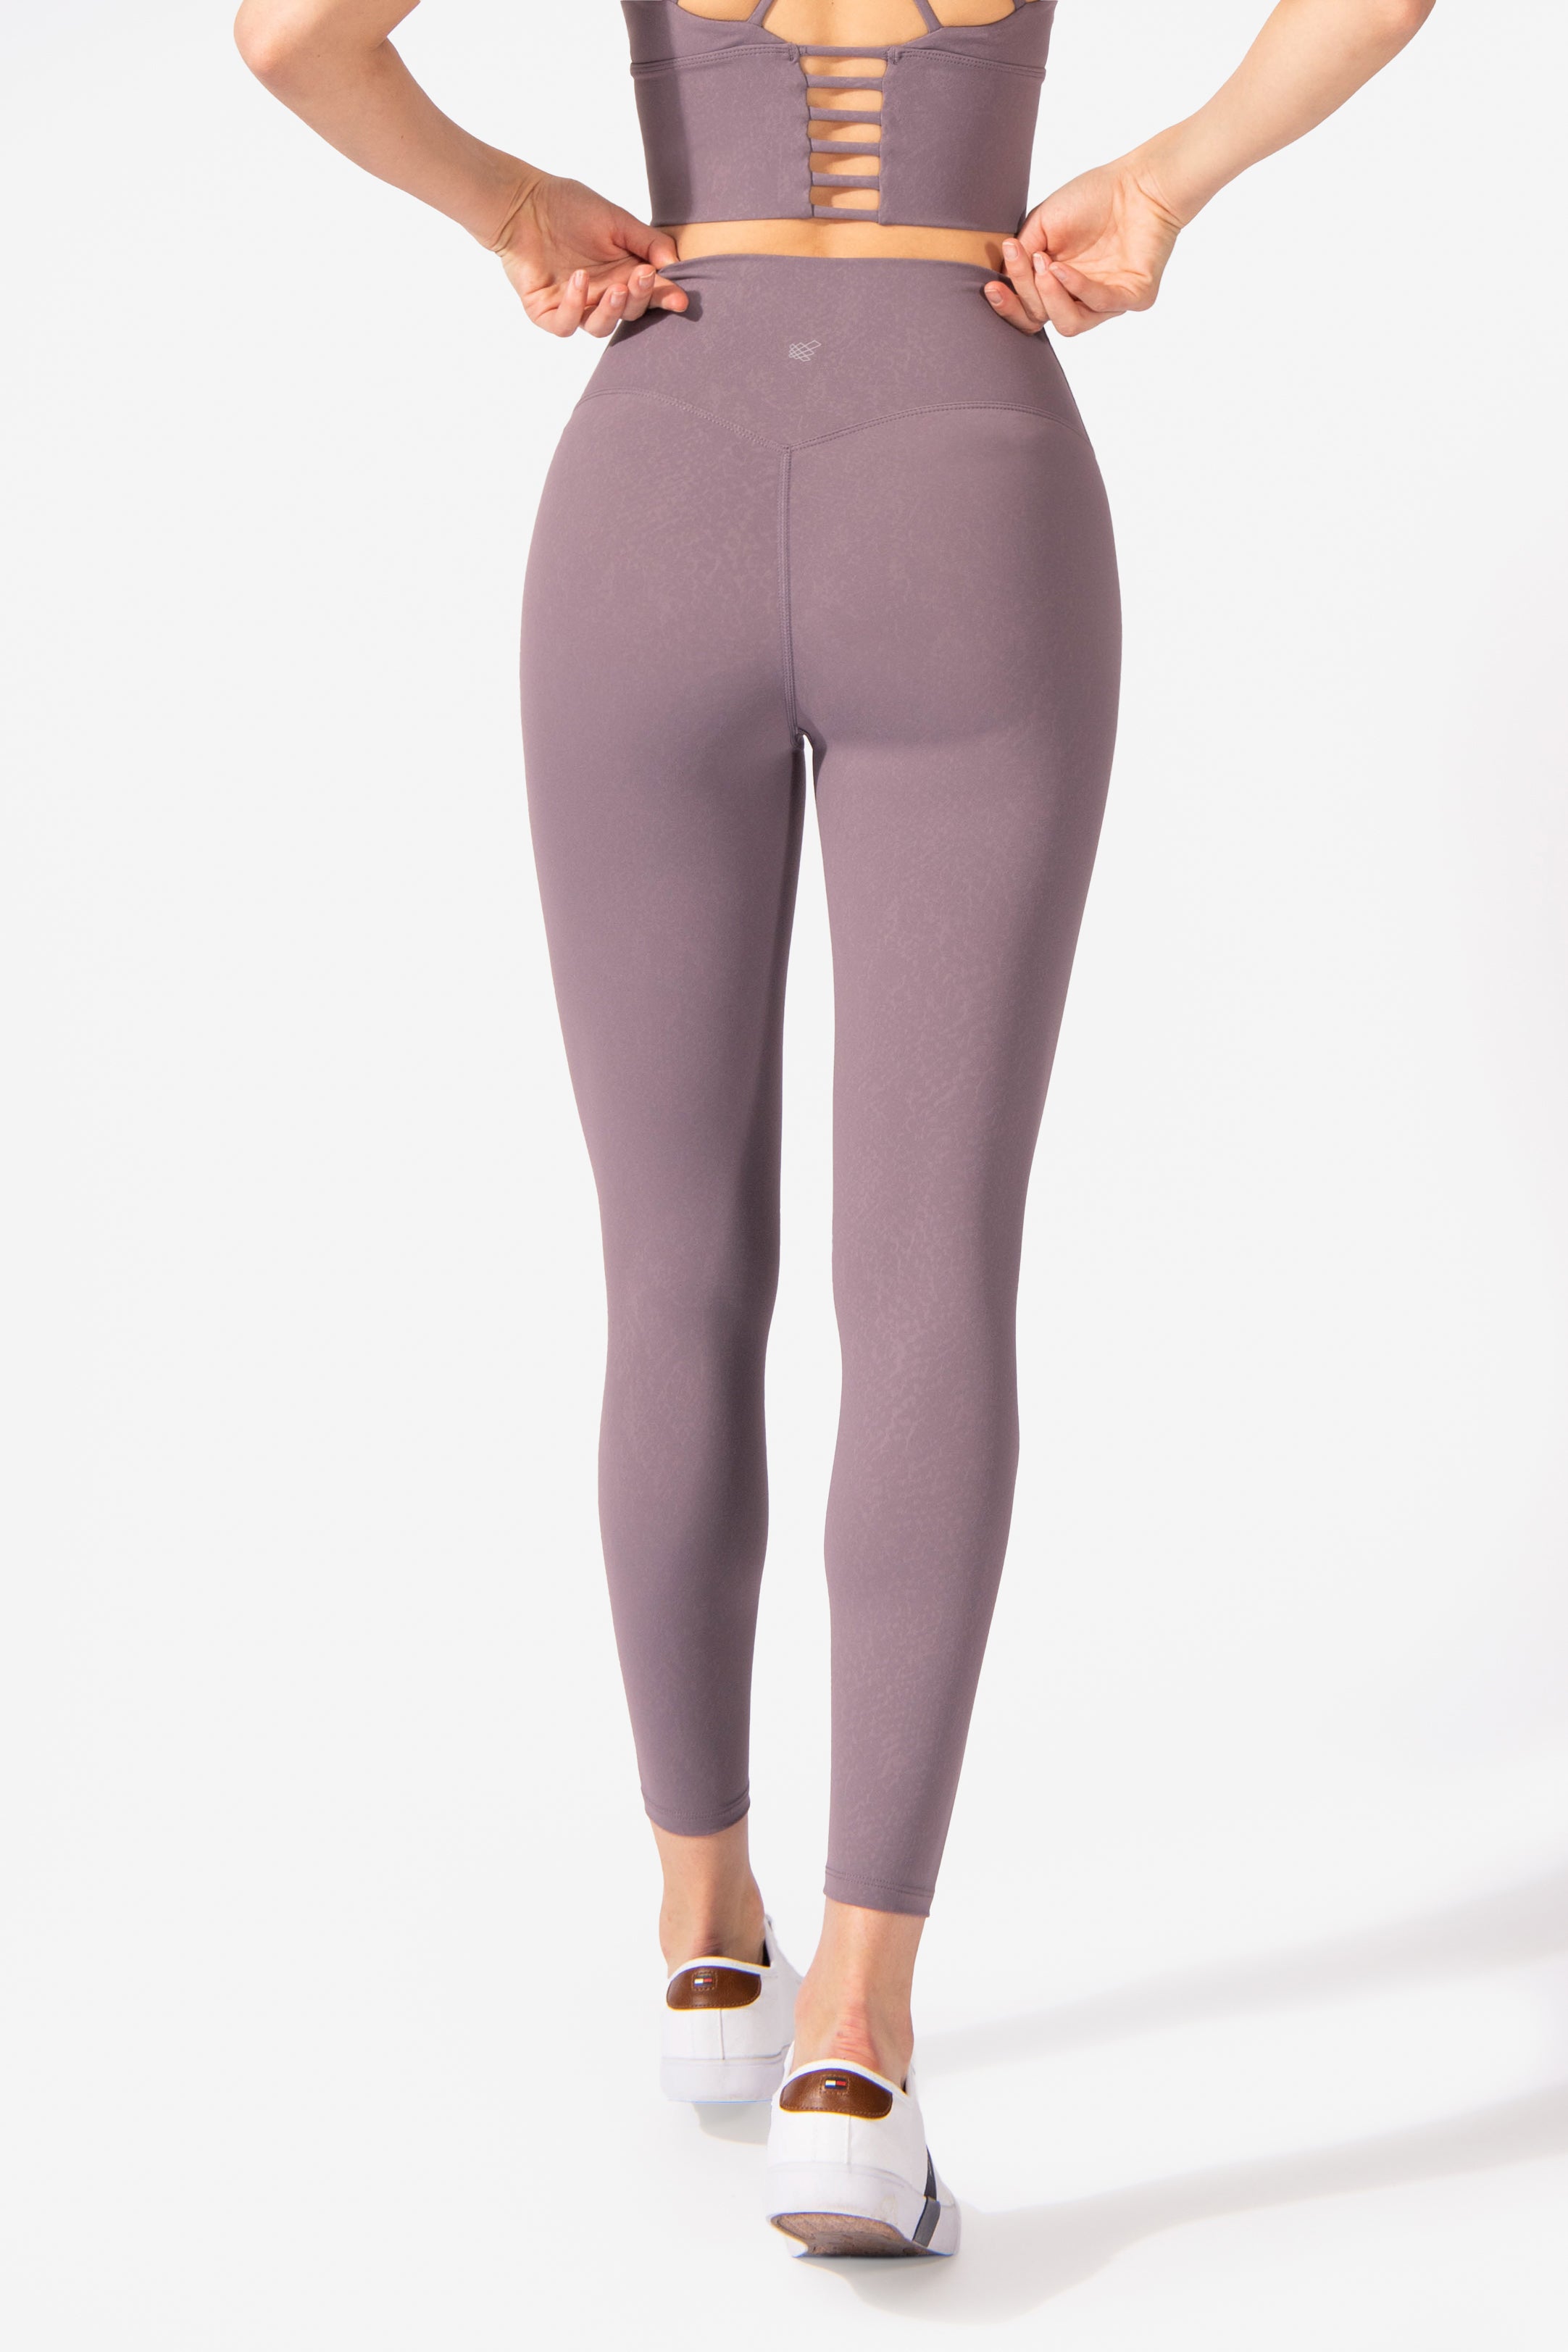 Girlfriend Collective LITE Legging Plum, Women's Fashion, Dresses & Sets,  Sets or Coordinates on Carousell